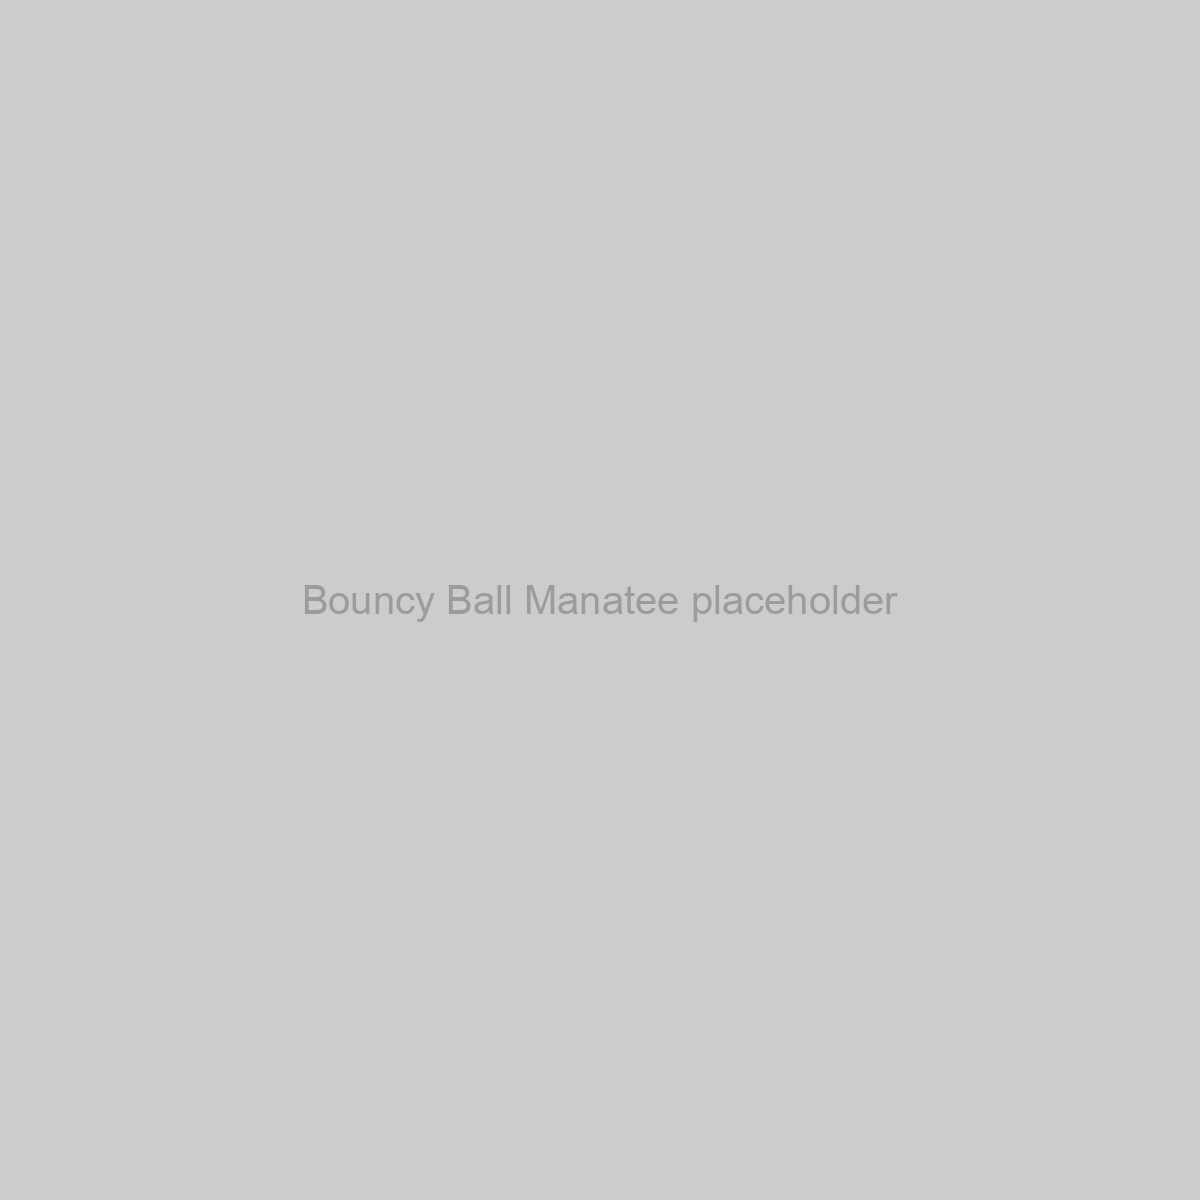 Bouncy Ball Manatee Placeholder Image